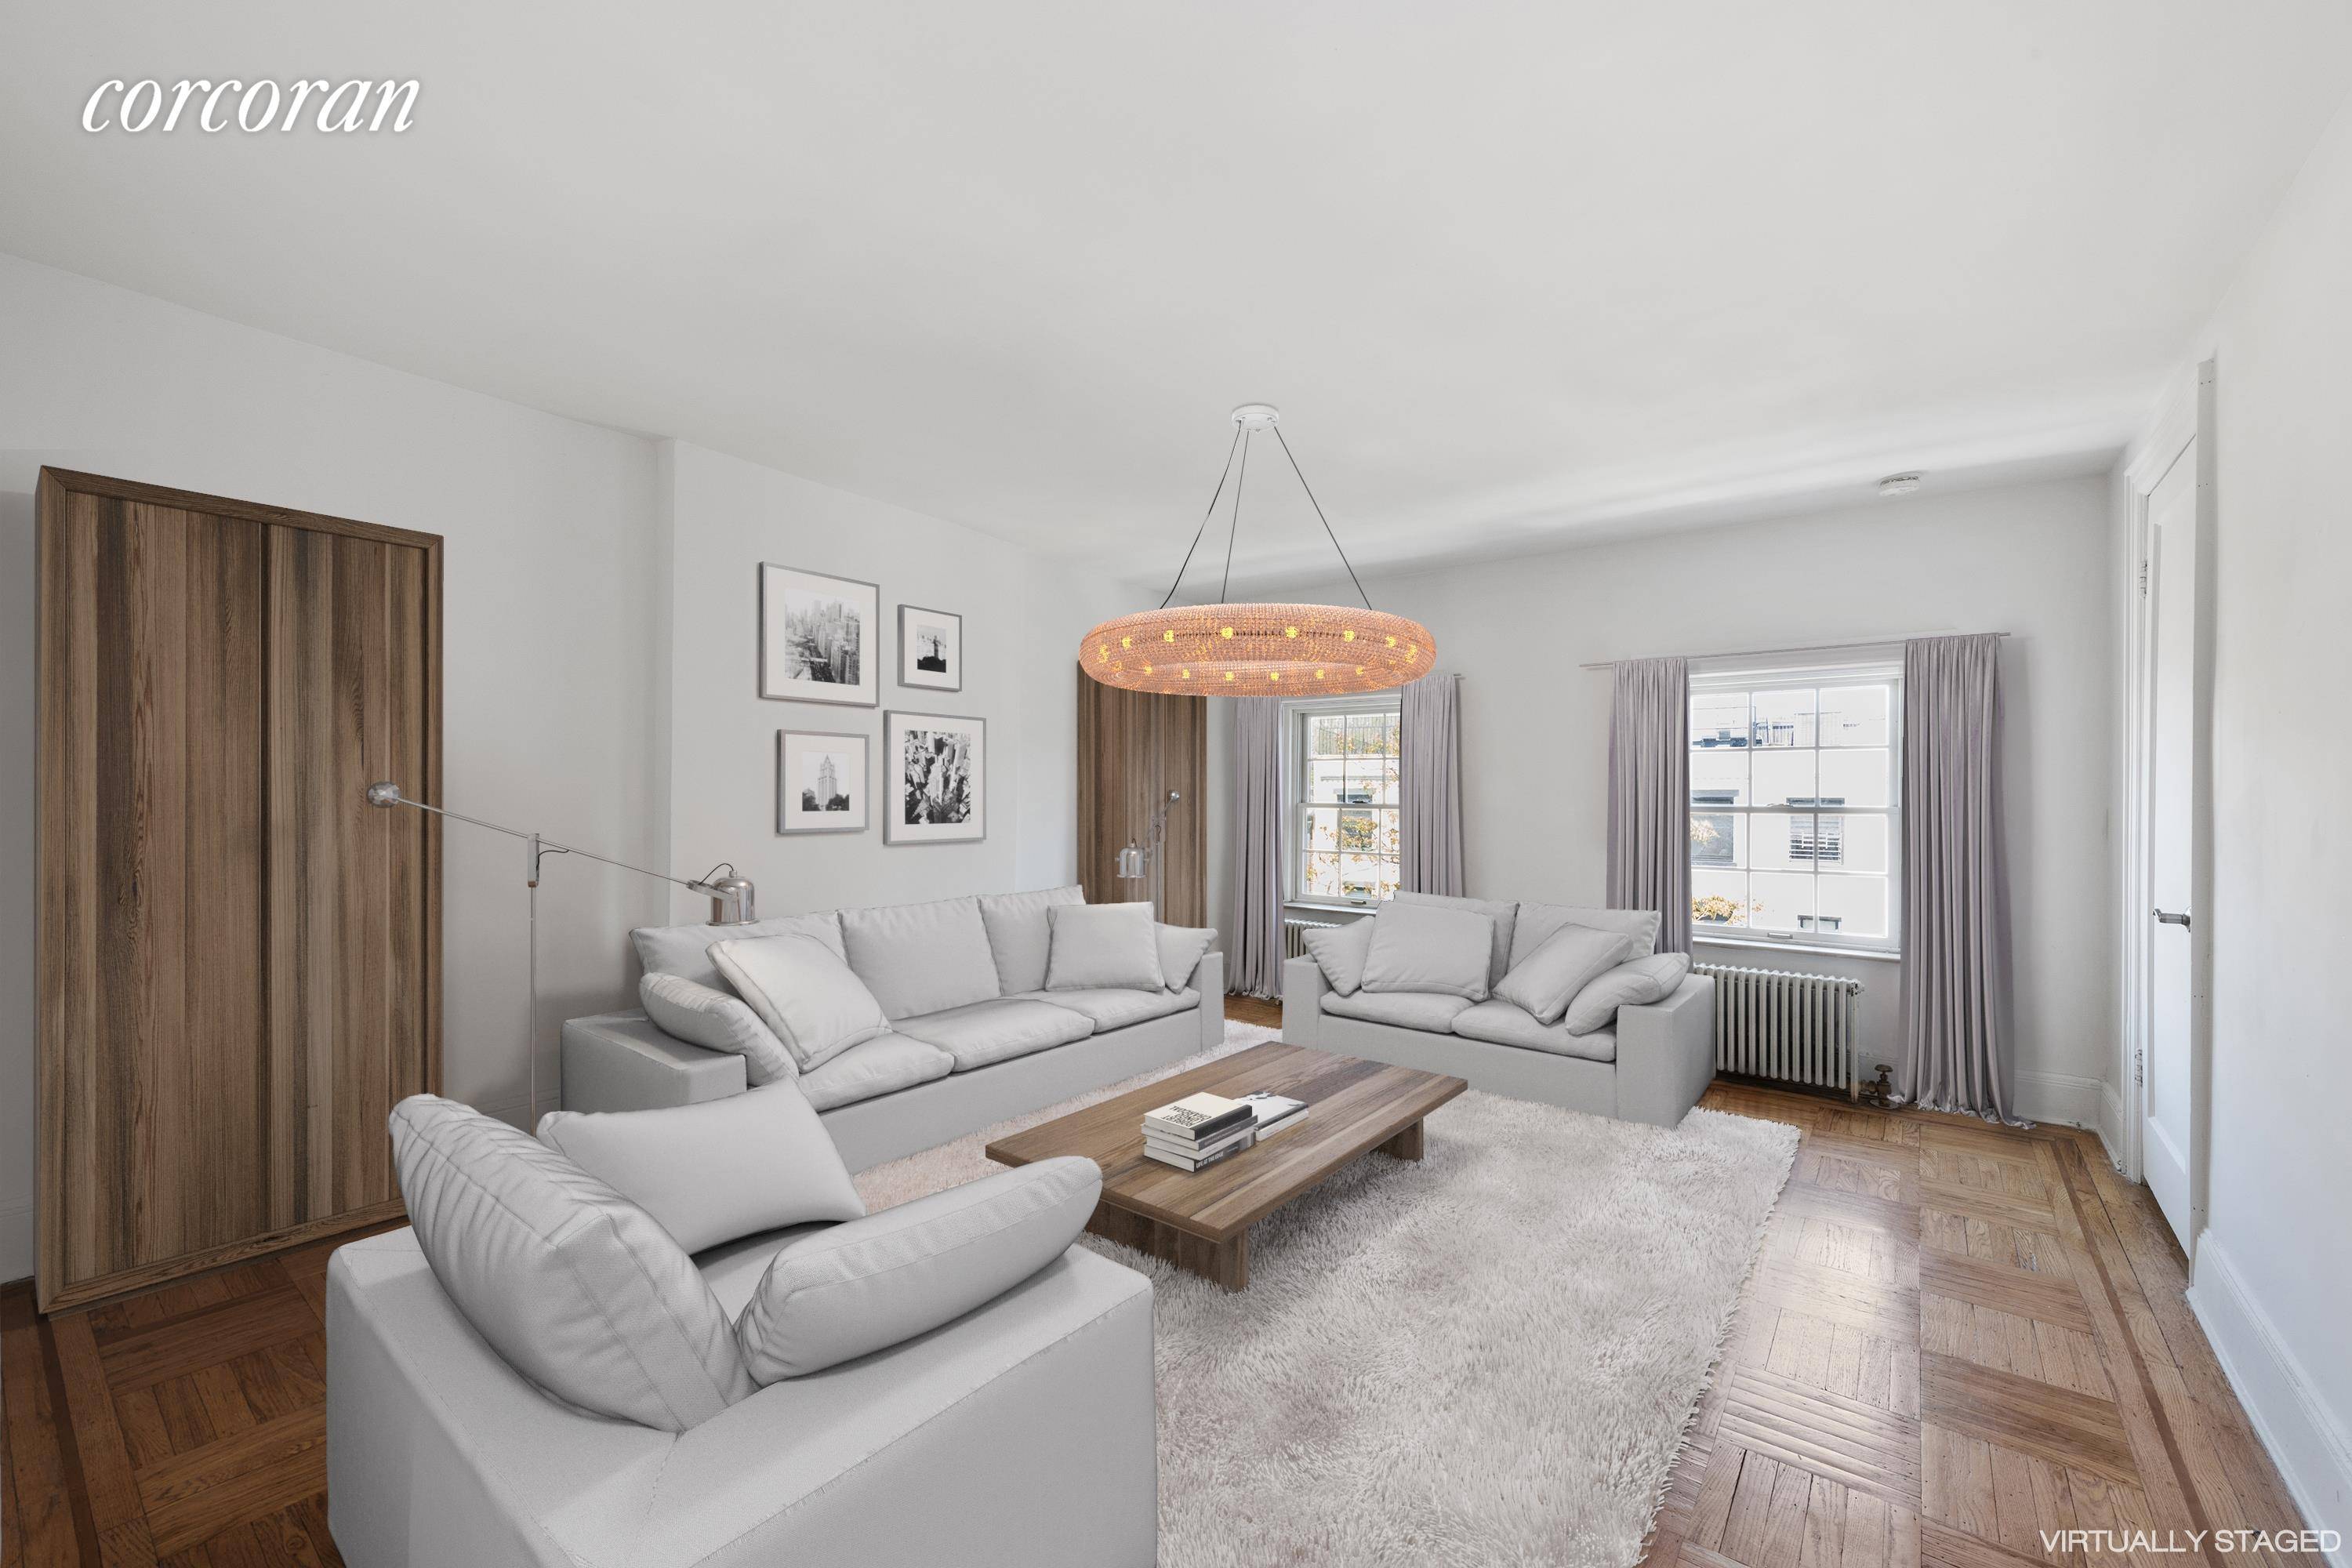 Welcome to 55 Montgomery Place, a 10 unit 4 story classic prewar brownstone co op located in the heart of North Park Slope.